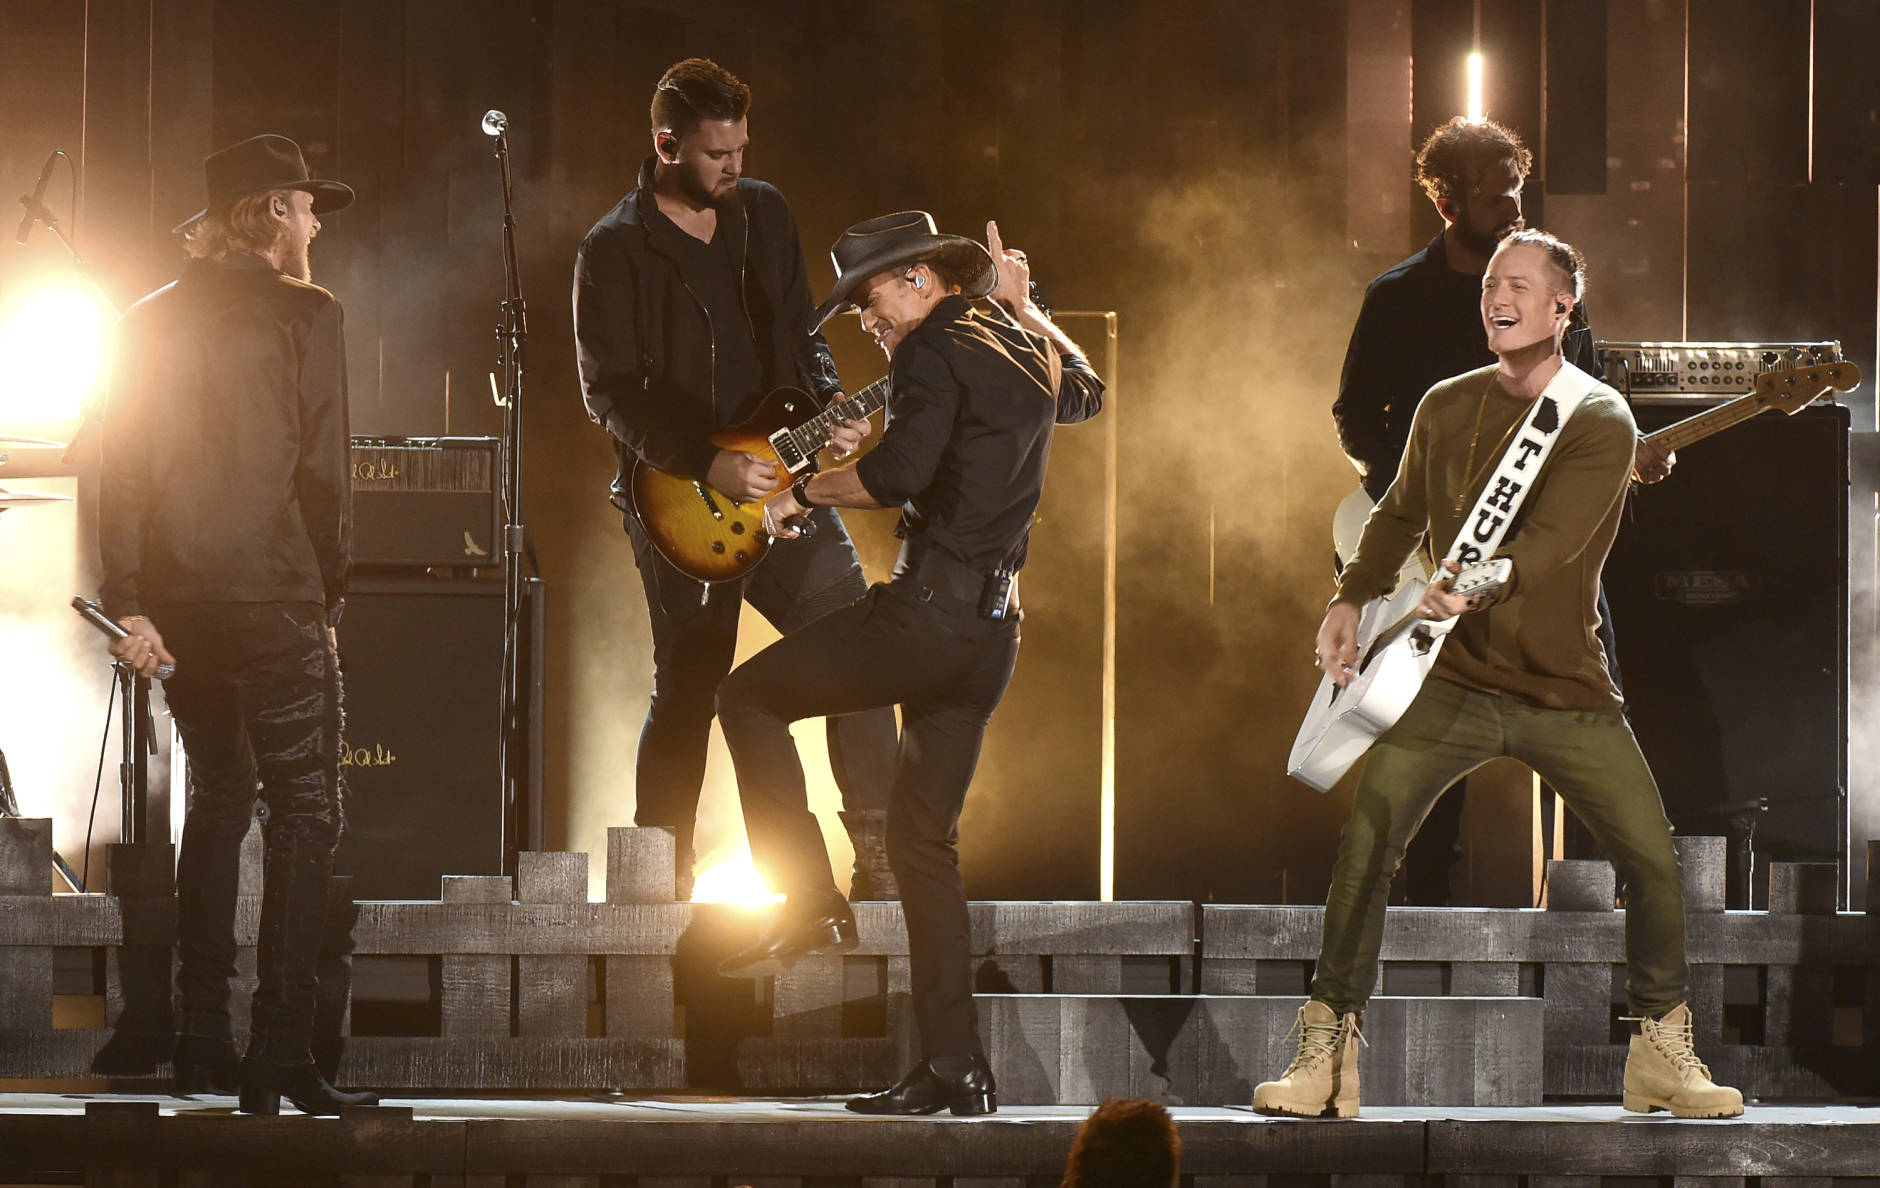 Tim McGraw, center, Brian Kelley, left, and Tyler Hubbard, right, of Florida Georgia Line, perform at the 50th annual CMA Awards at the Bridgestone Arena on Wednesday, Nov. 2, 2016, in Nashville, Tenn. (Photo by Charles Sykes/Invision/AP)